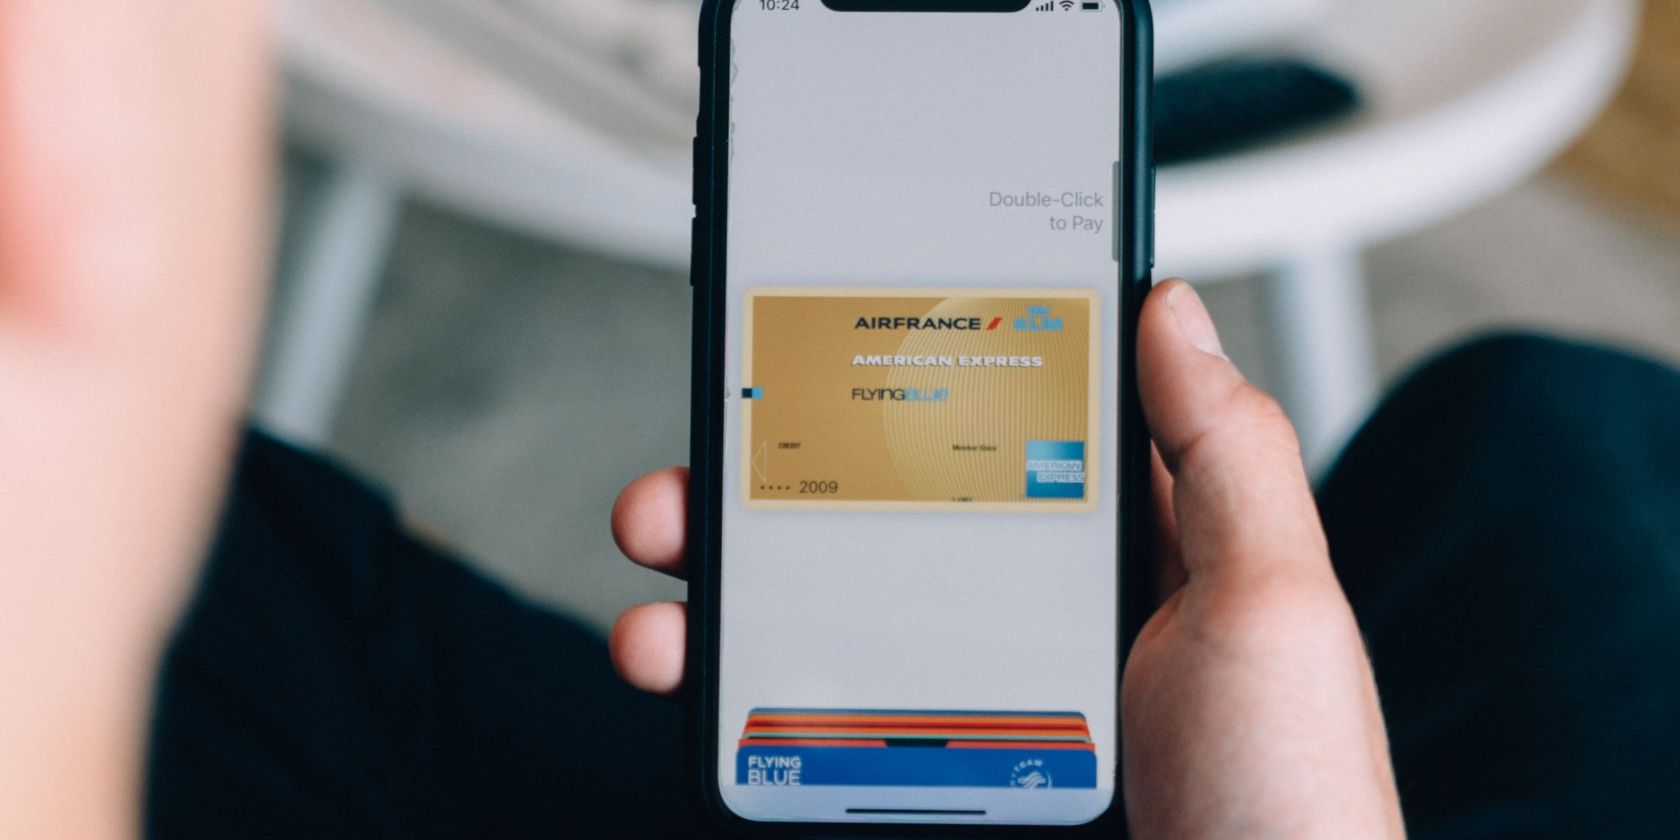 How to Autofill Credit Card Details on an iPhone